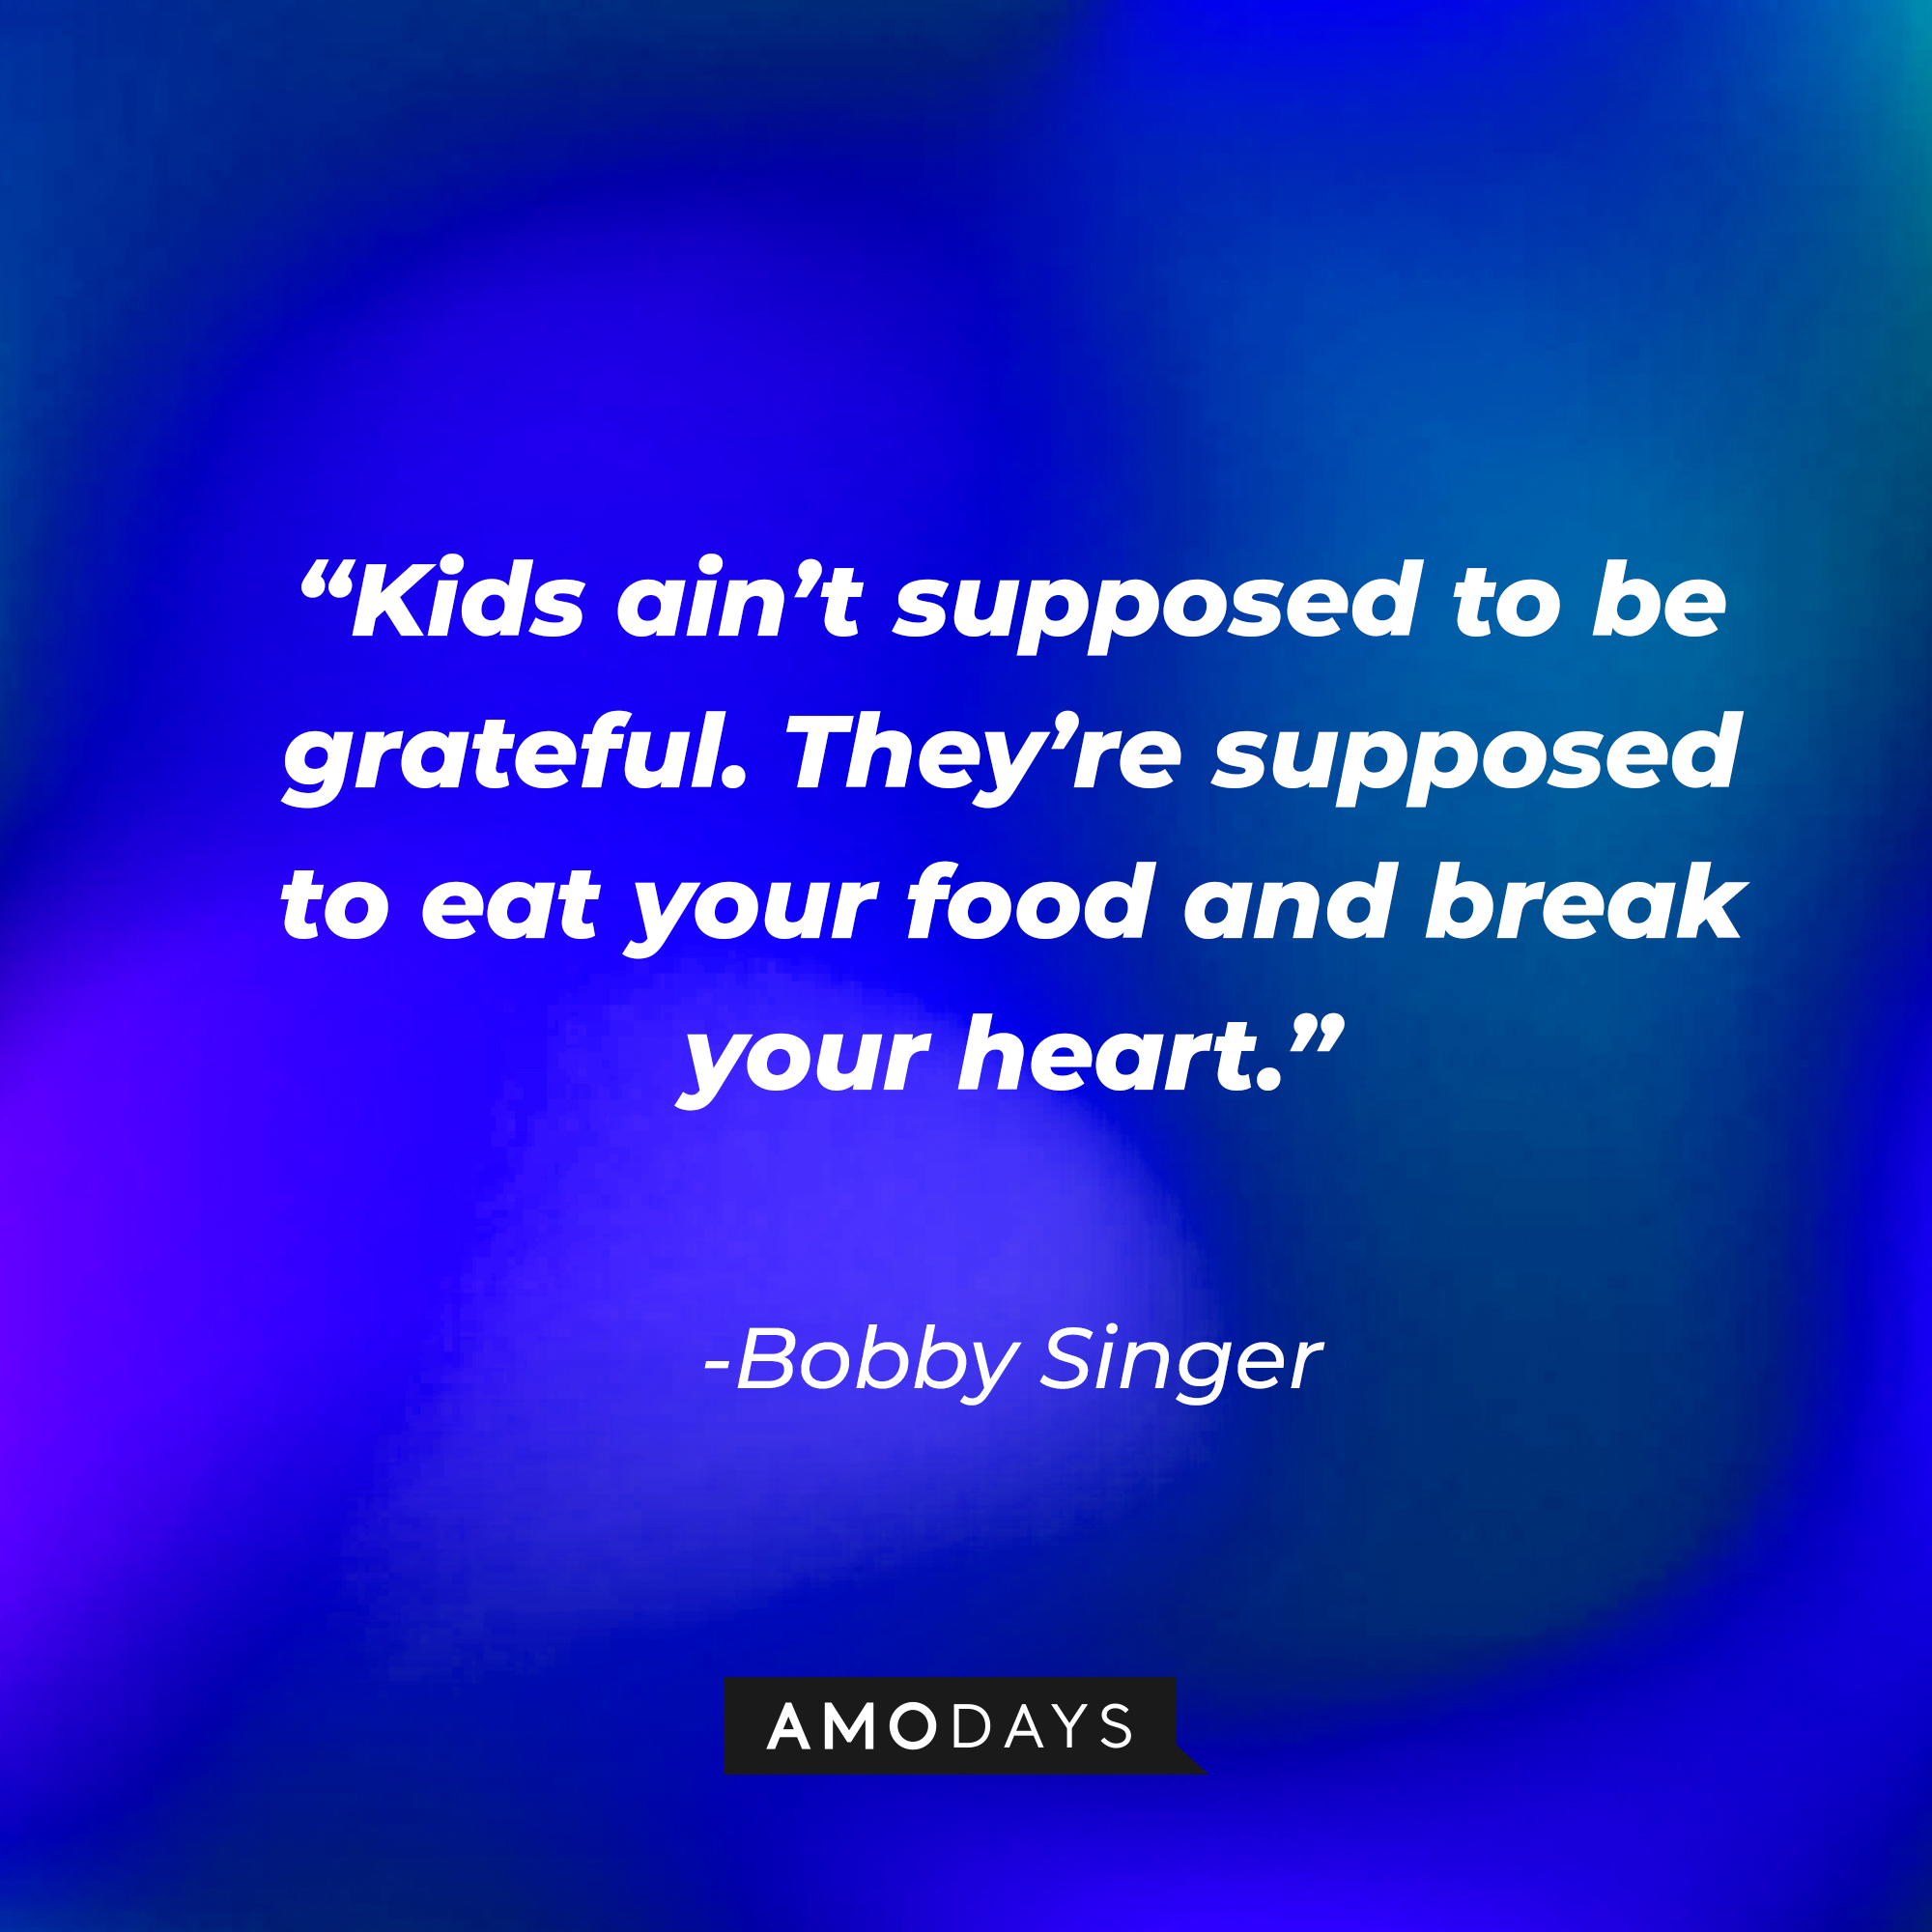 Bobby Singer's quote: "Kids ain't supposed to be grateful. They're supposed to eat your food and break your heart." | Source: Amodays